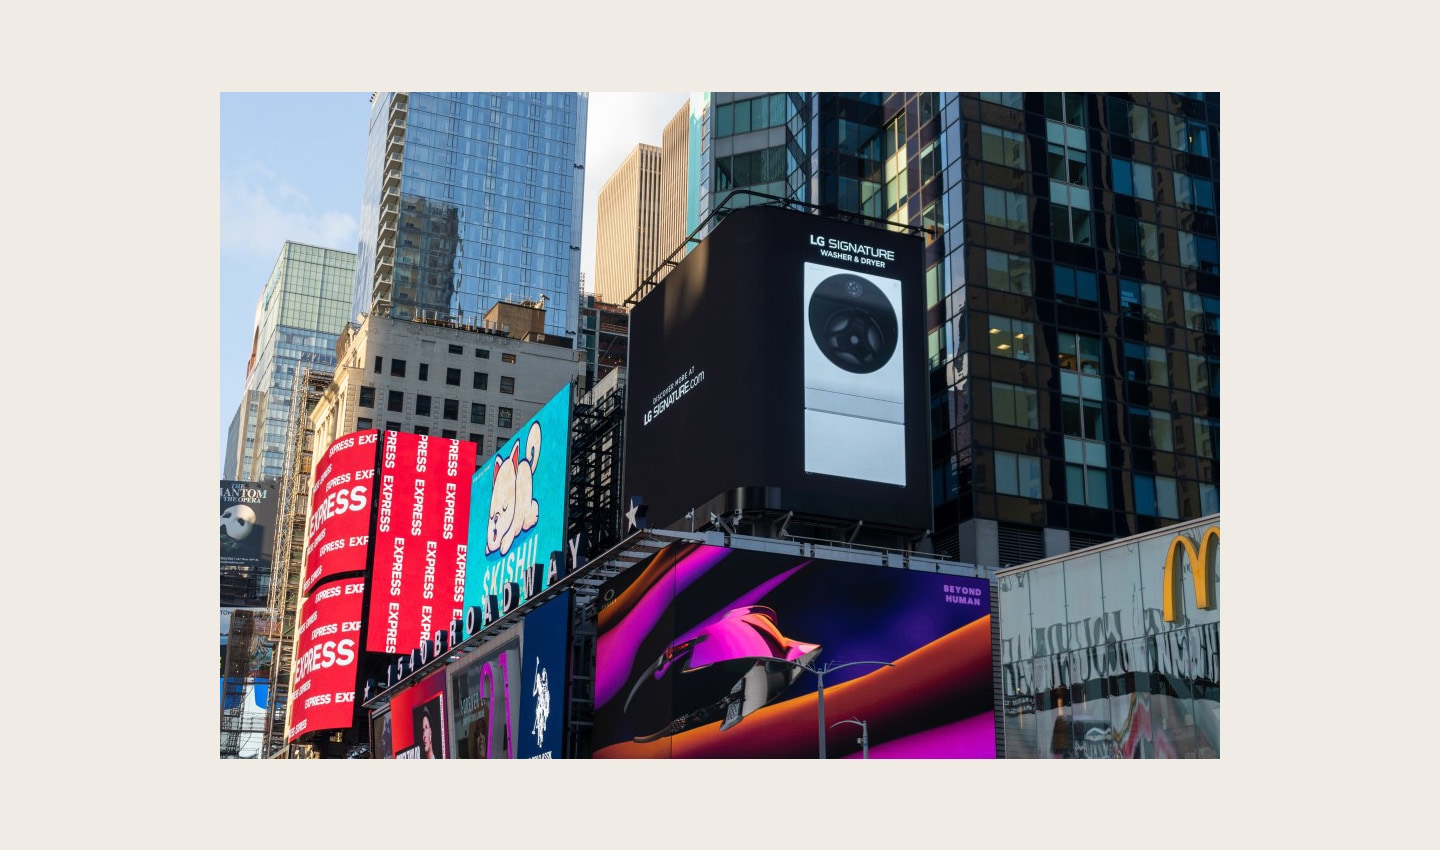 LG's digital billboard in Time Square, New York with an image of LG SIGNATURE Washer and Dryer against a black background